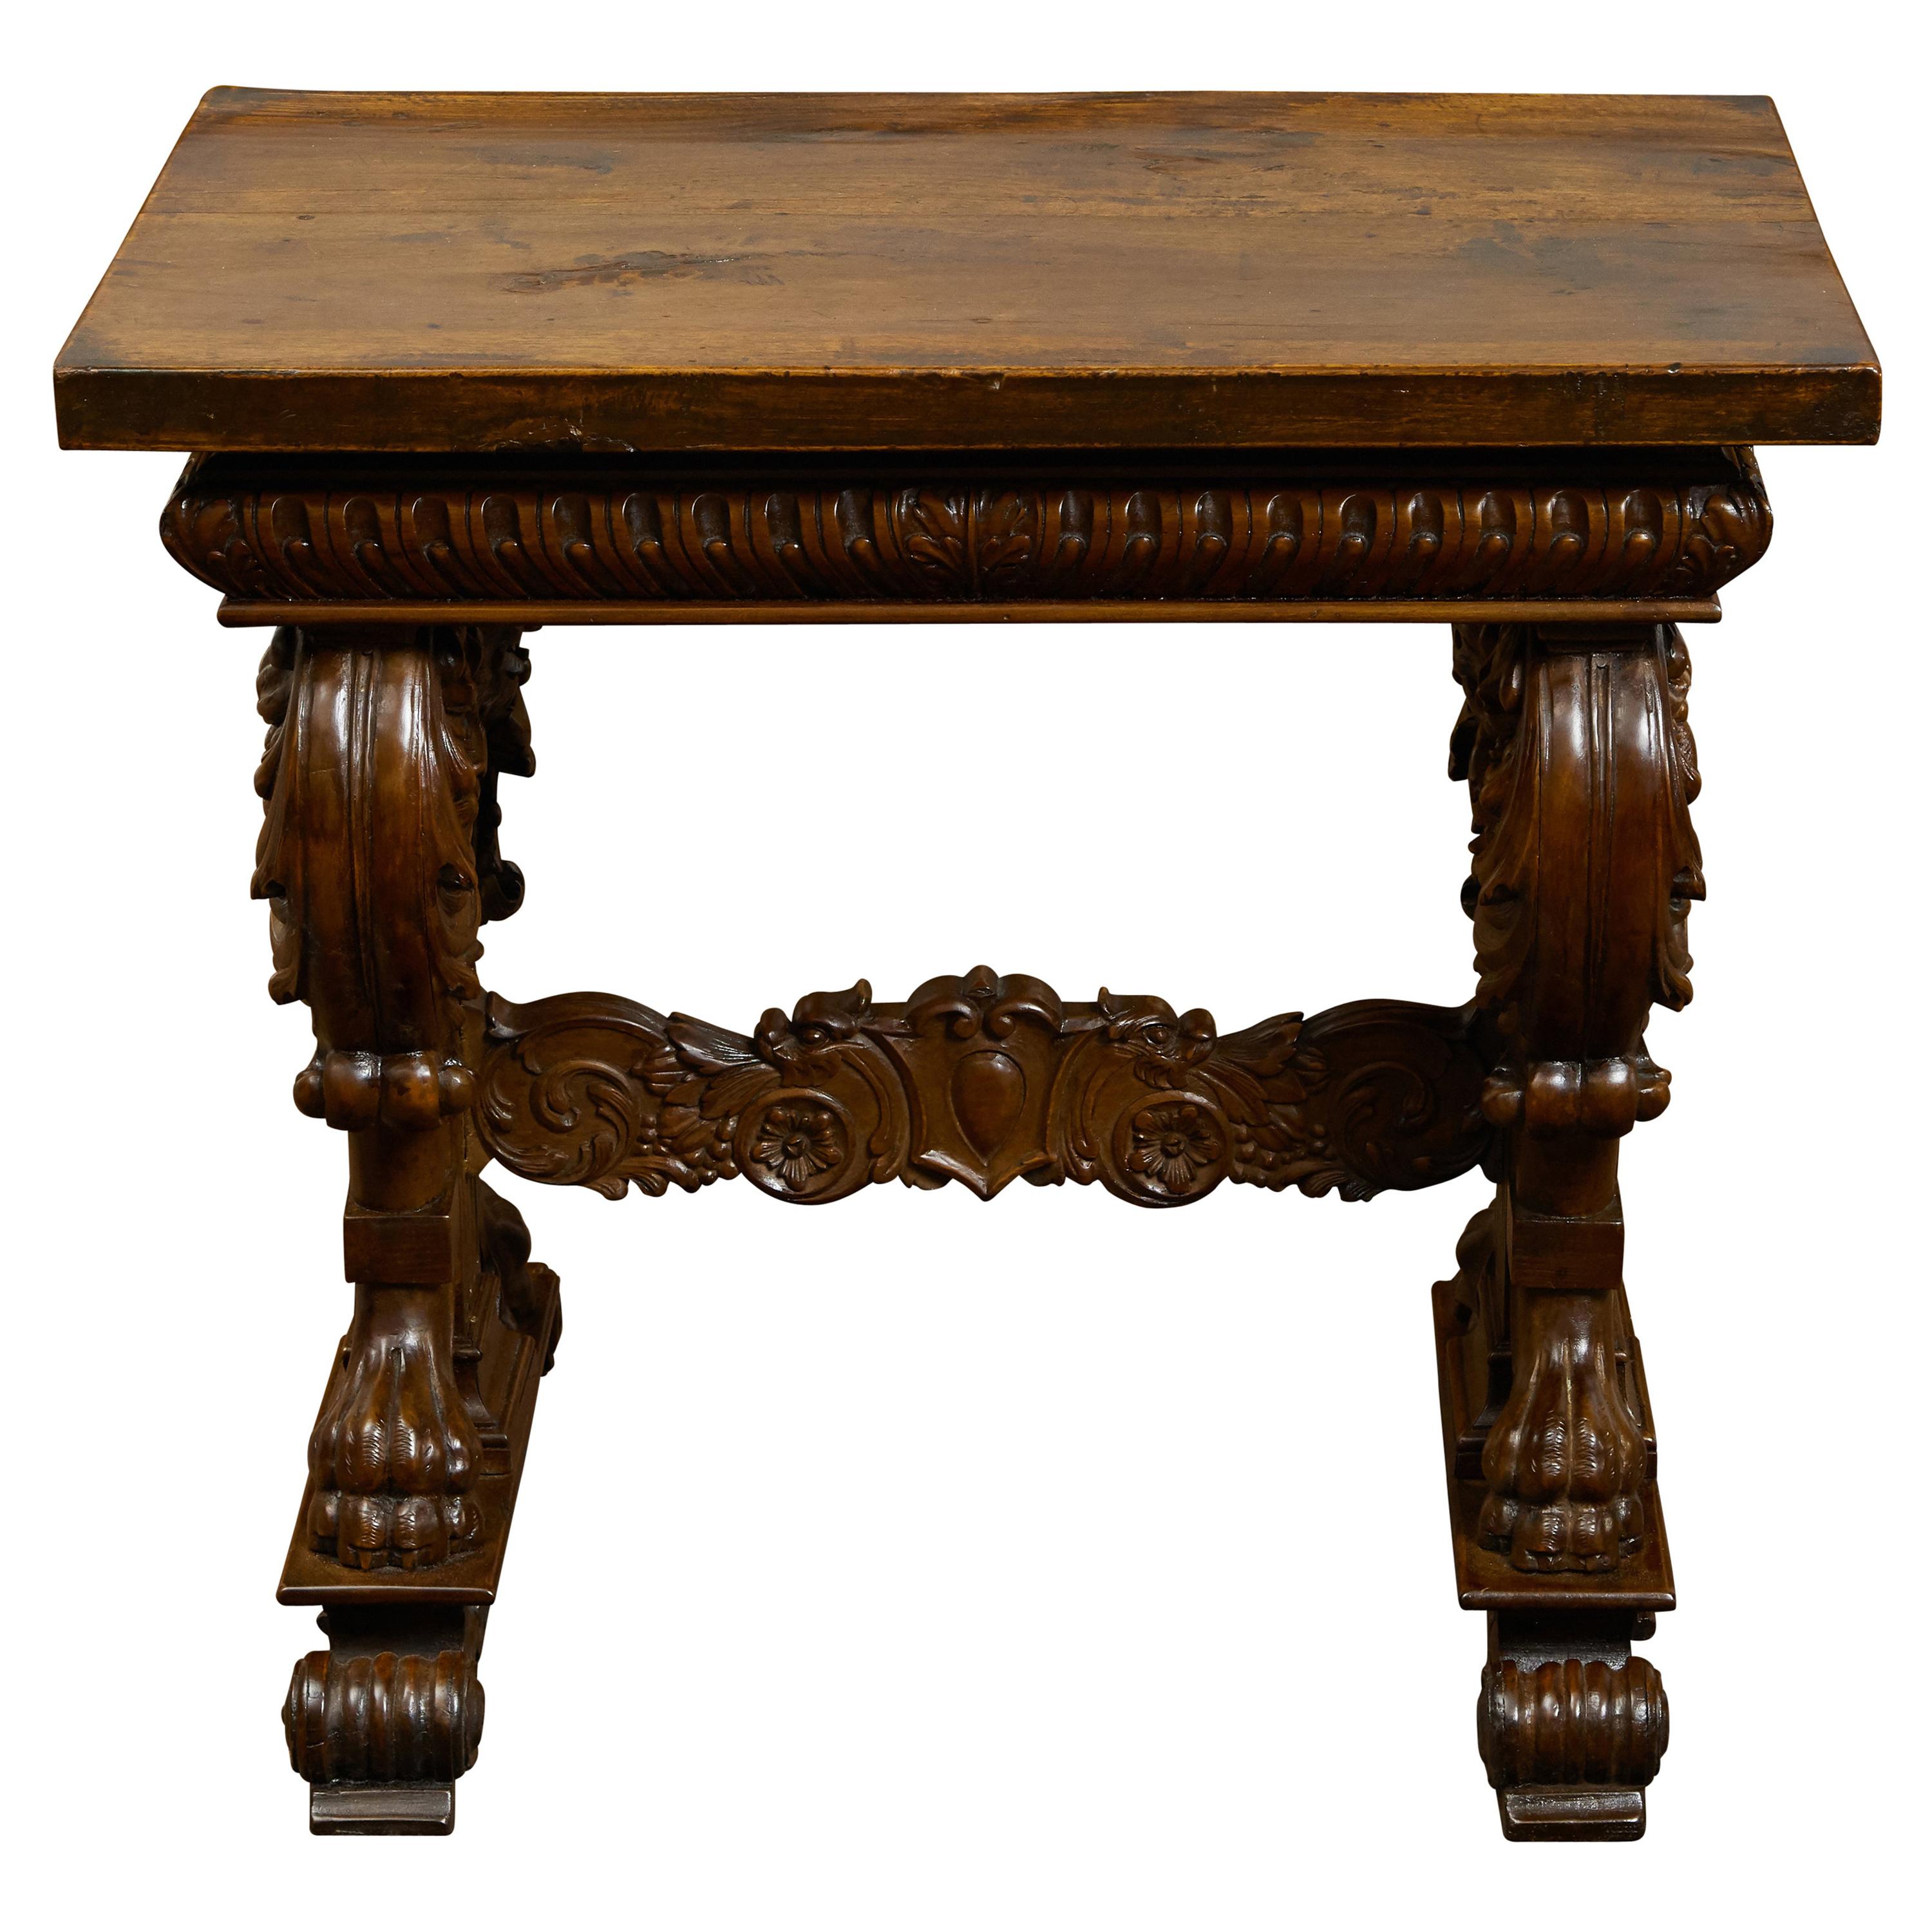 Italian 1800s Walnut Side Table with Lion Motifs and Richly Carved Trestle Base